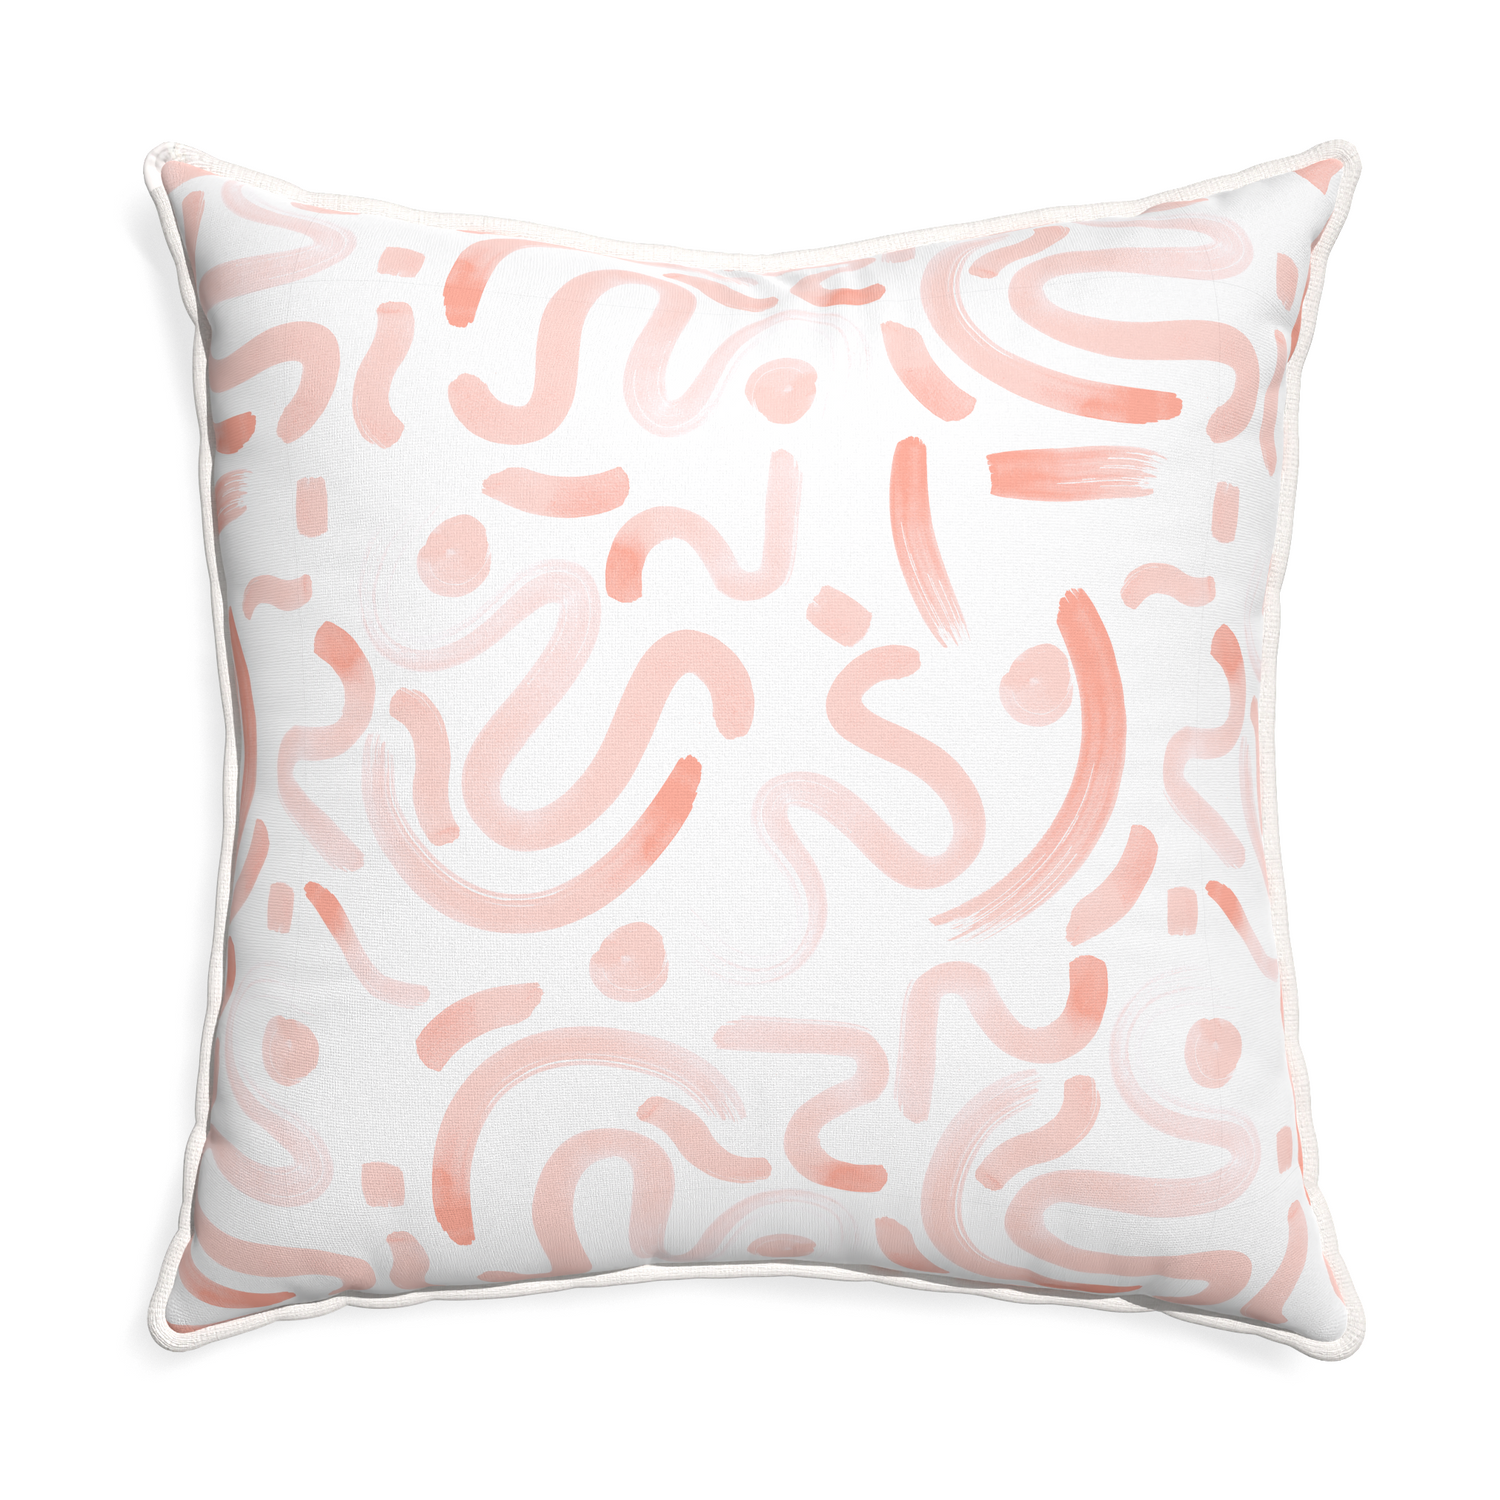 Euro-sham hockney pink custom pillow with snow piping on white background